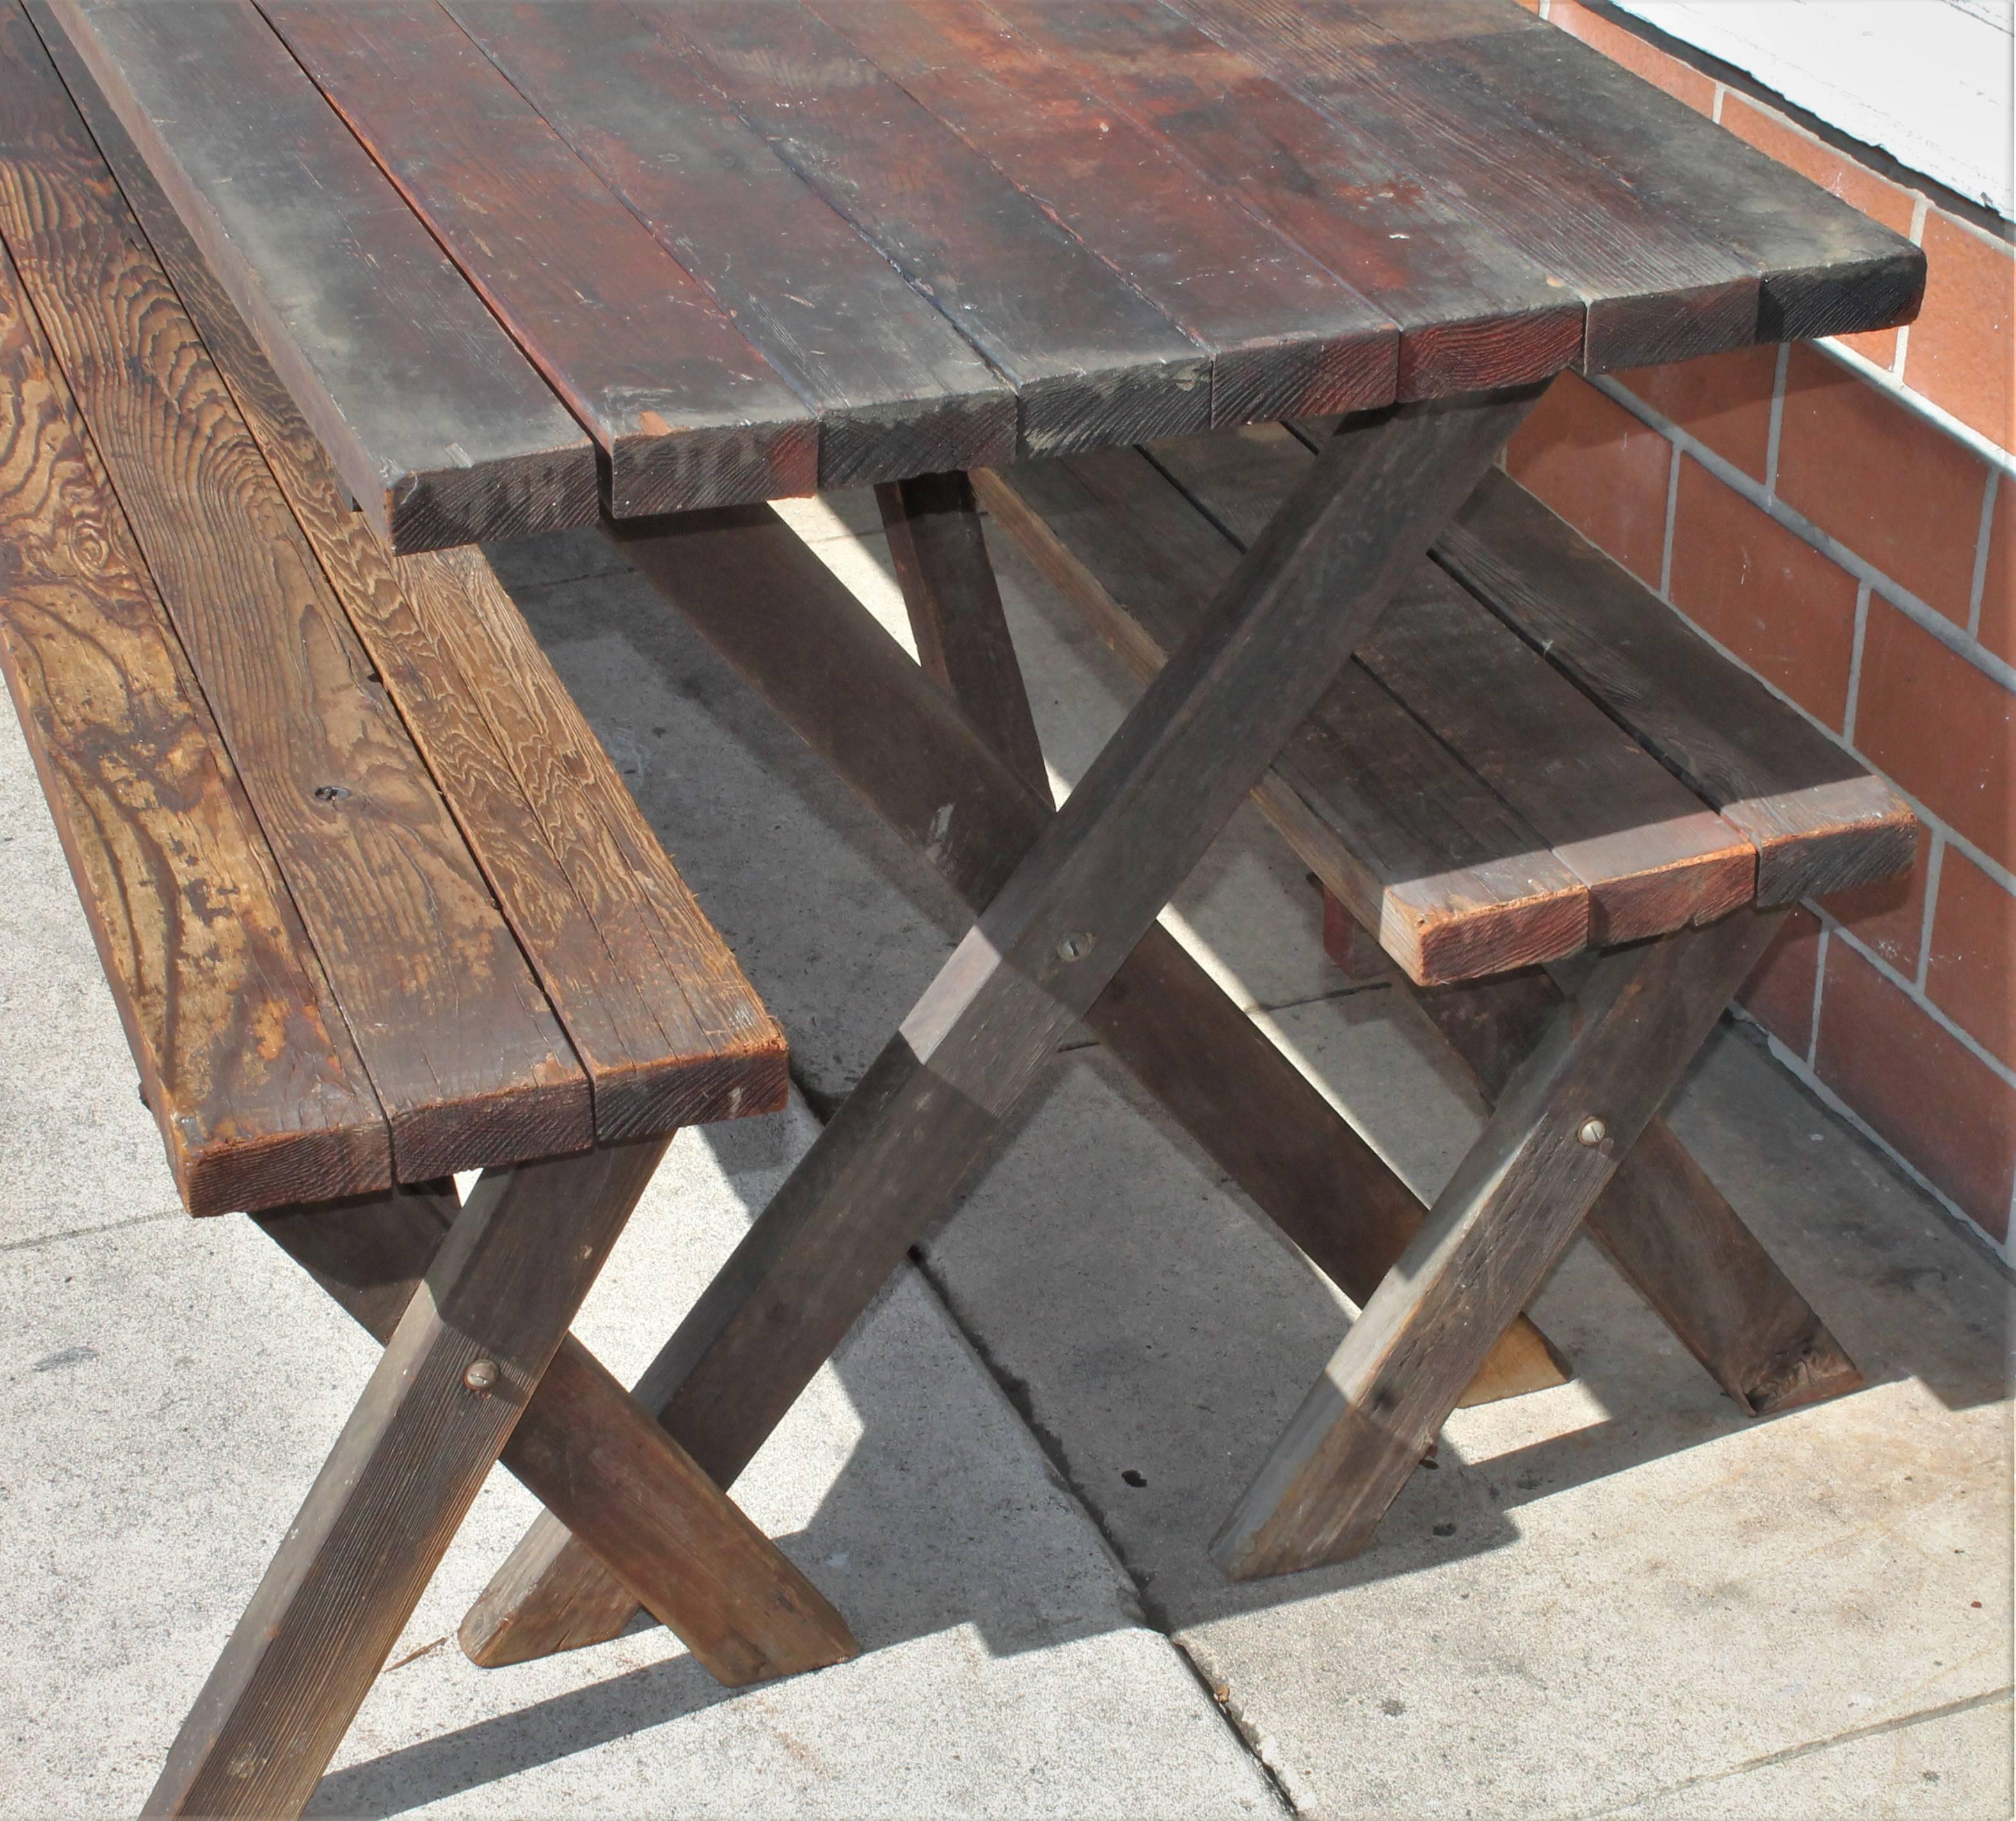 Wood Rustic Picnic Table and Matching Benches